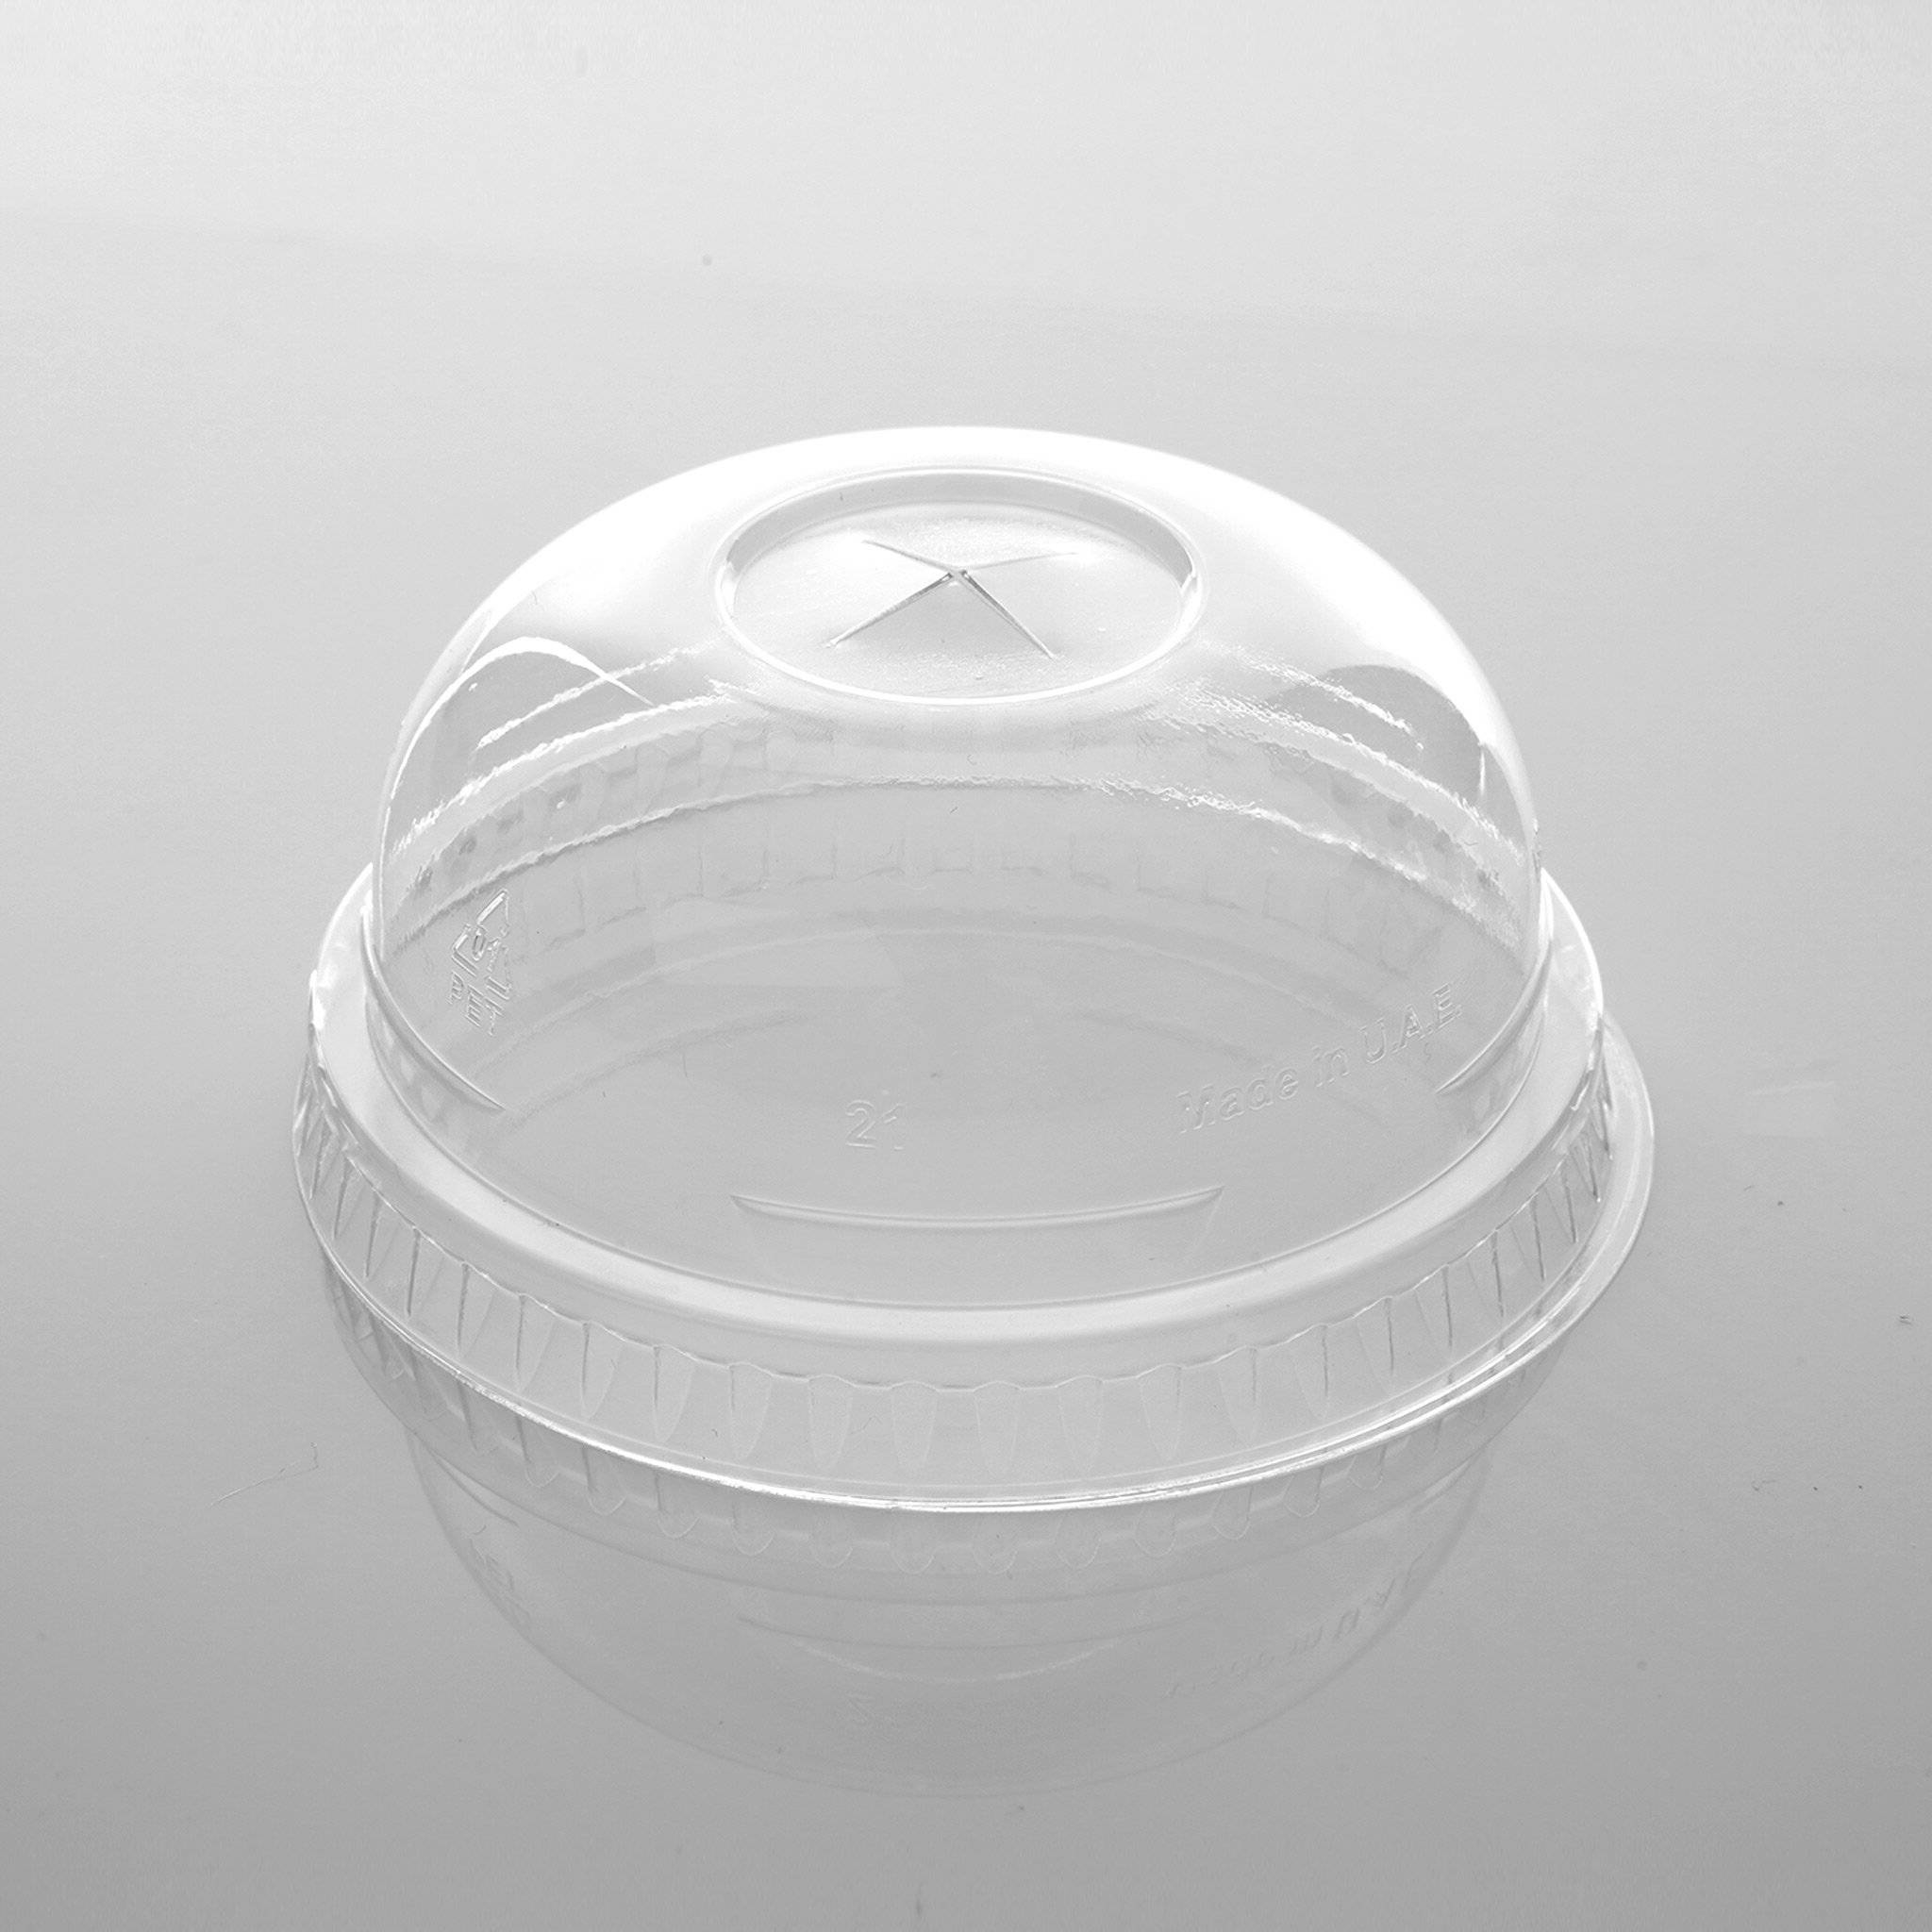 Stock Your Home 20 oz Dessert Cups With Dome Lids (50 Pack) - Plastic